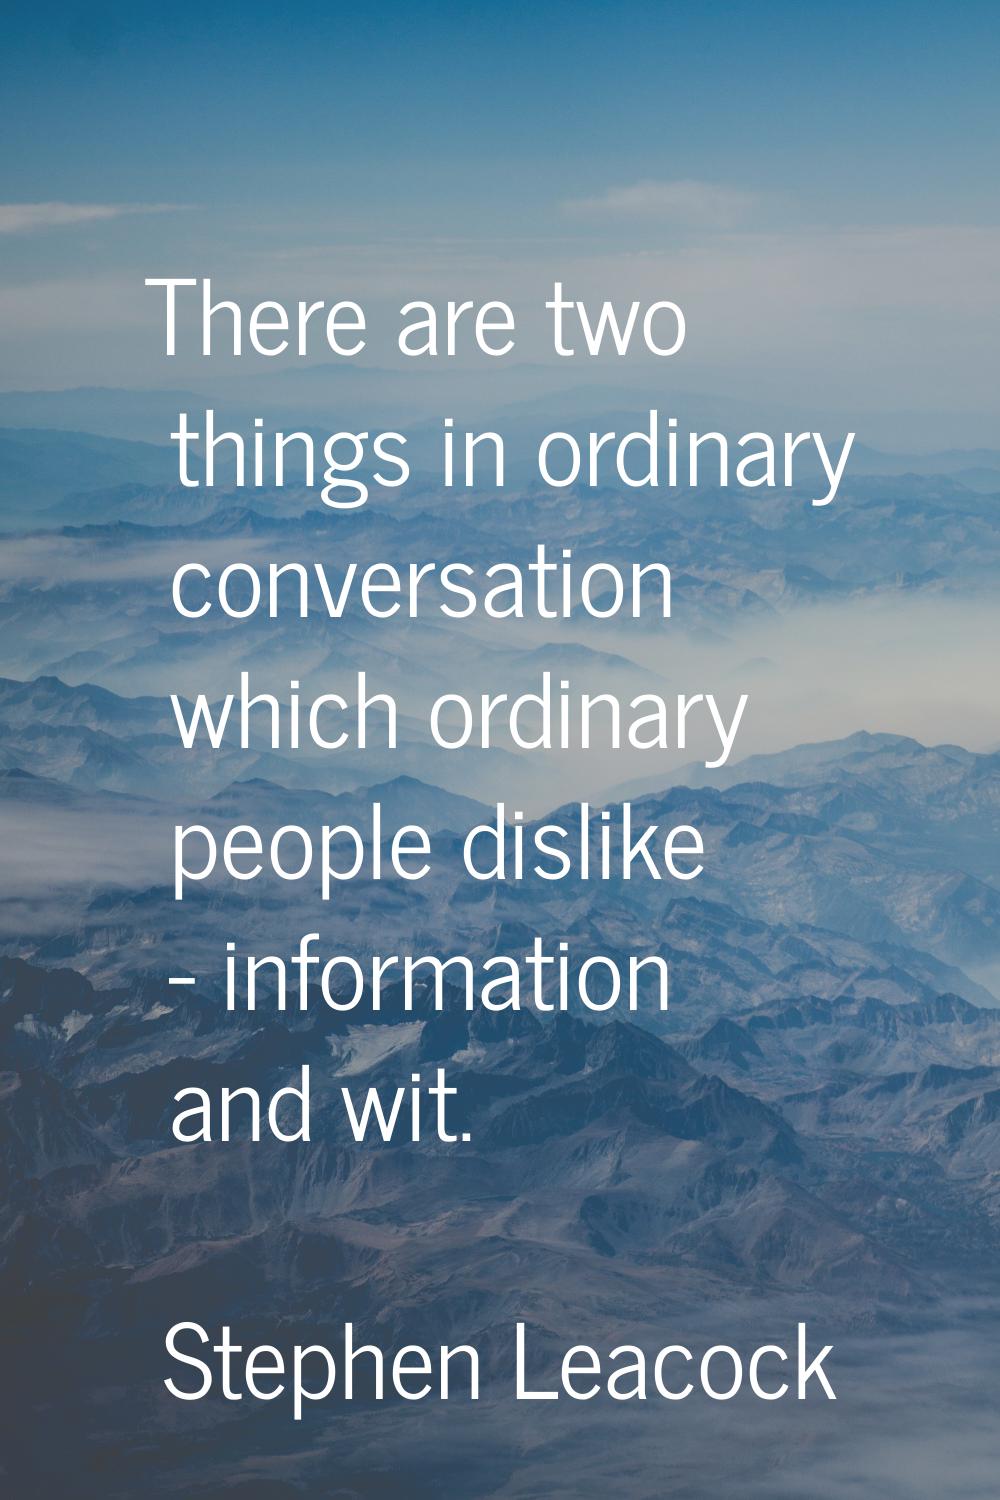 There are two things in ordinary conversation which ordinary people dislike - information and wit.